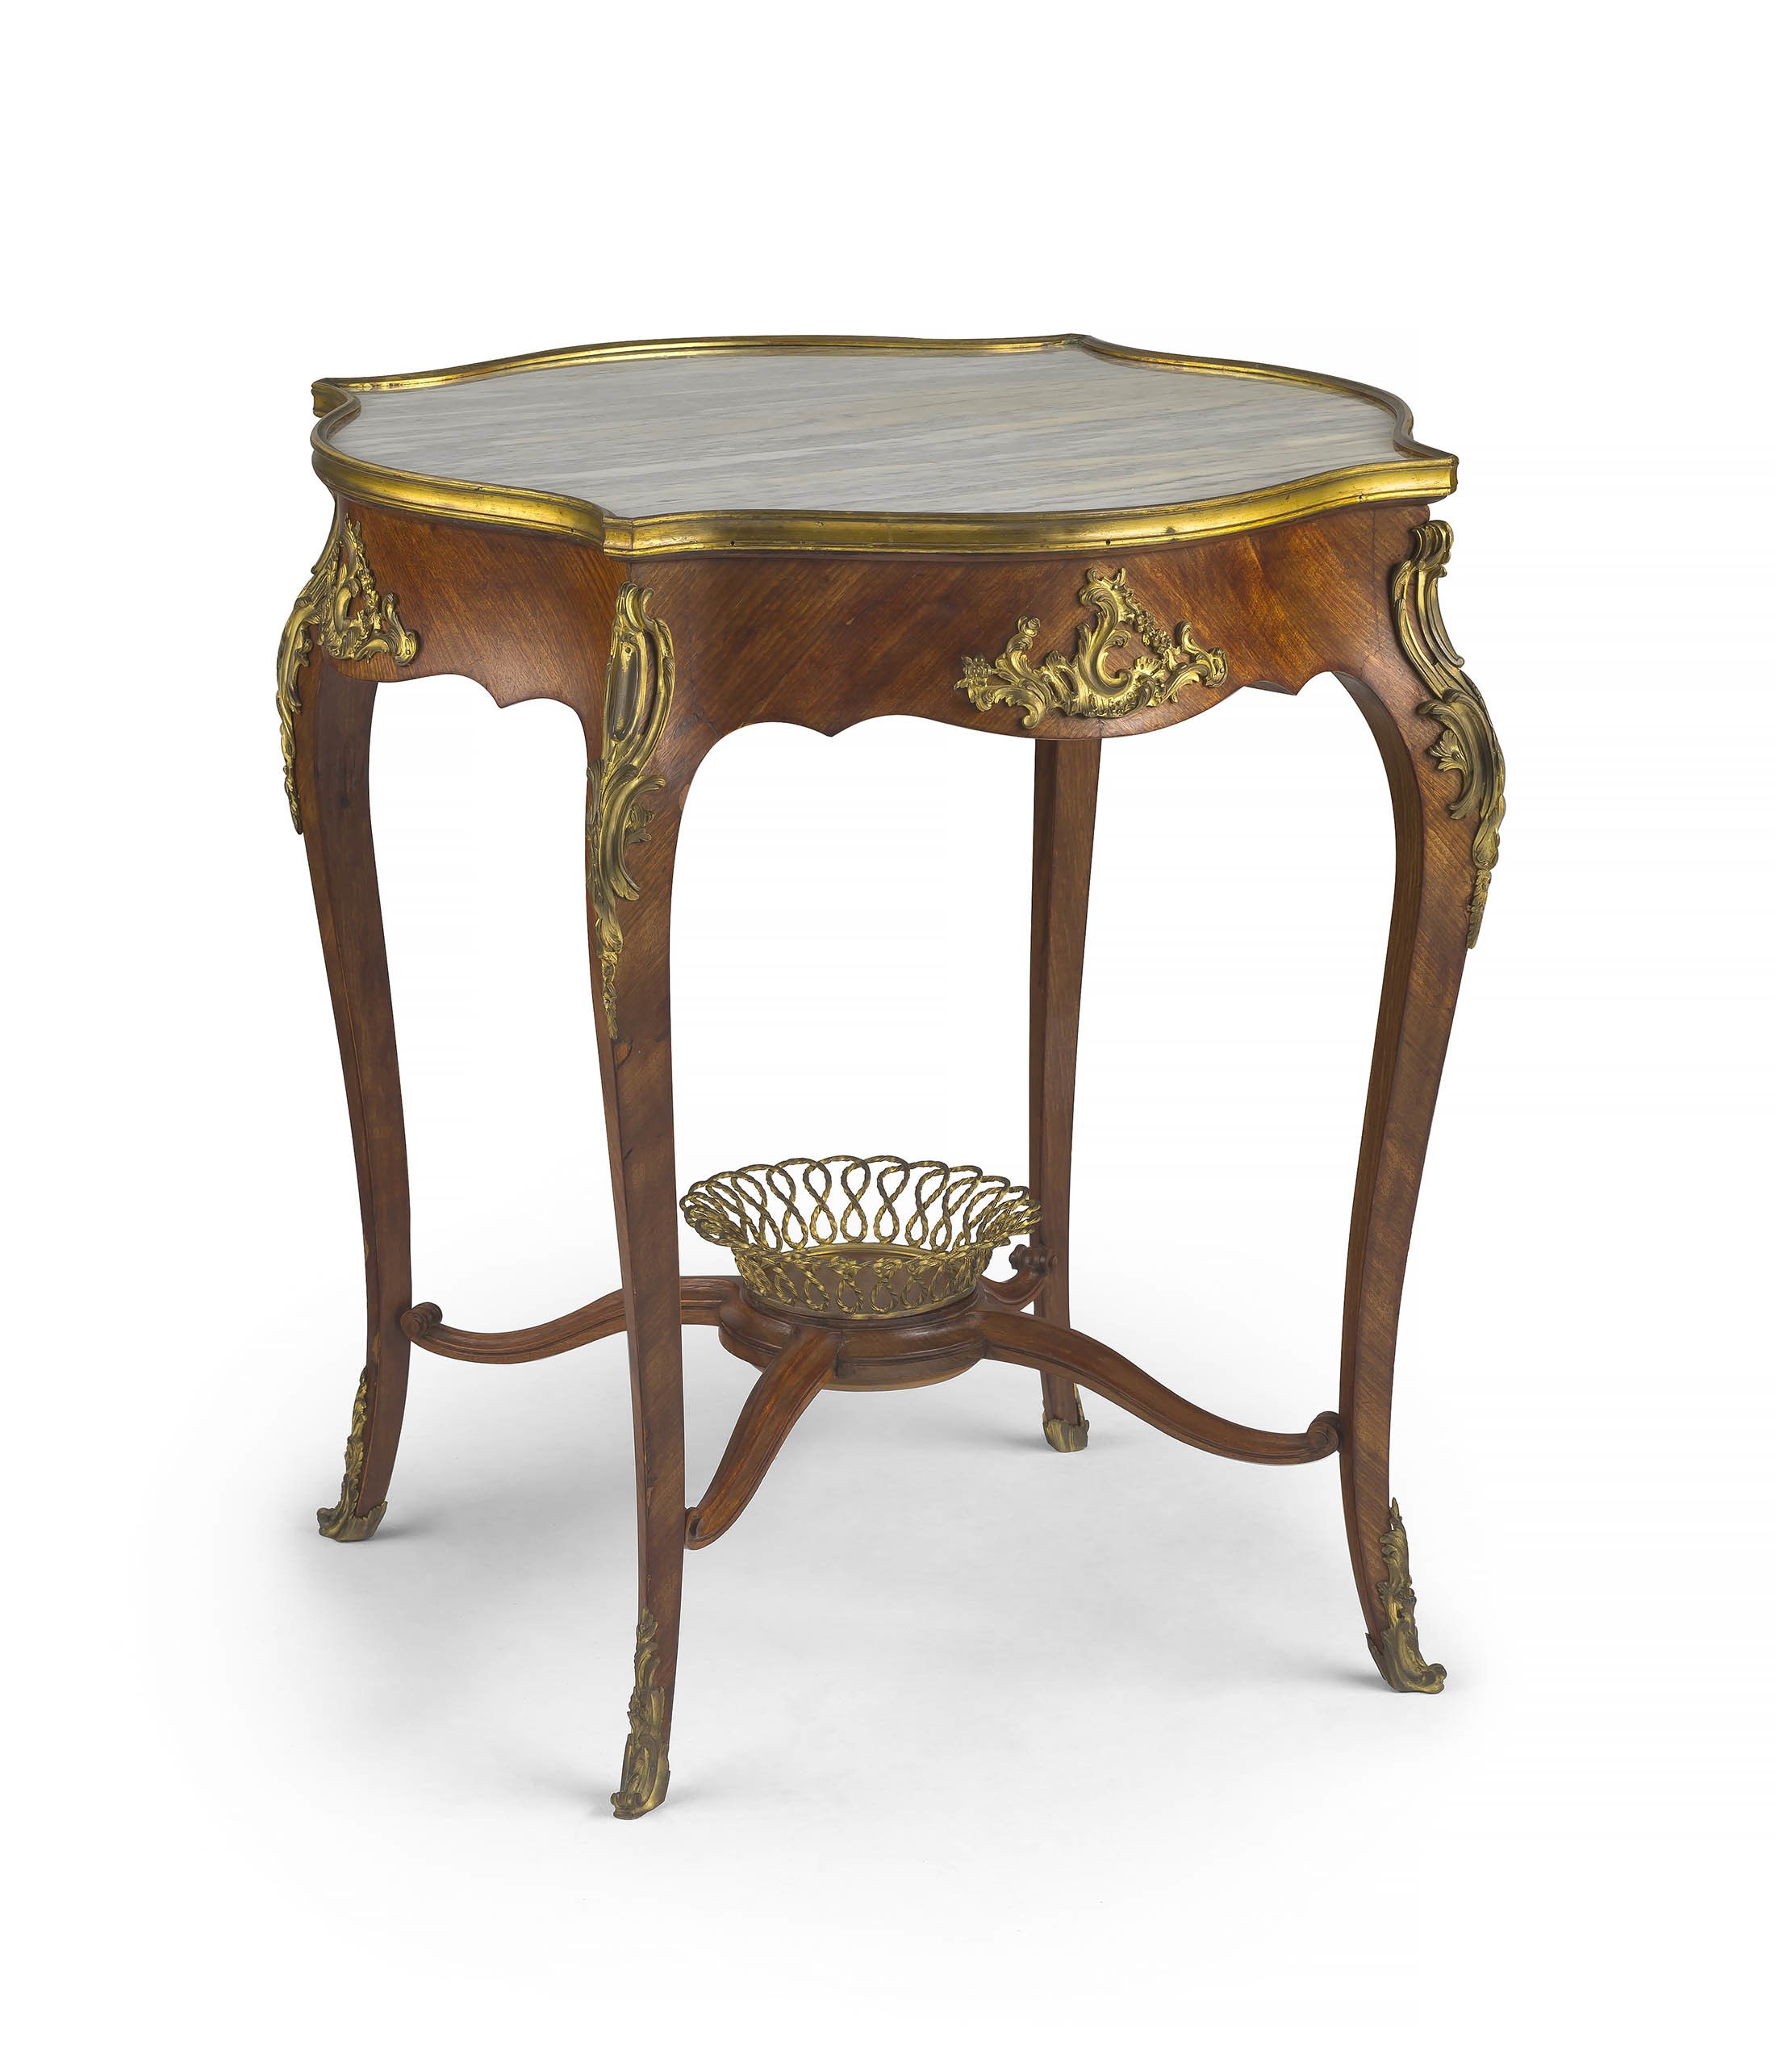 A Louis XVI style marble-topped, kingwood and gilt-metal-mounted occasional table, late 19th/early 20th century